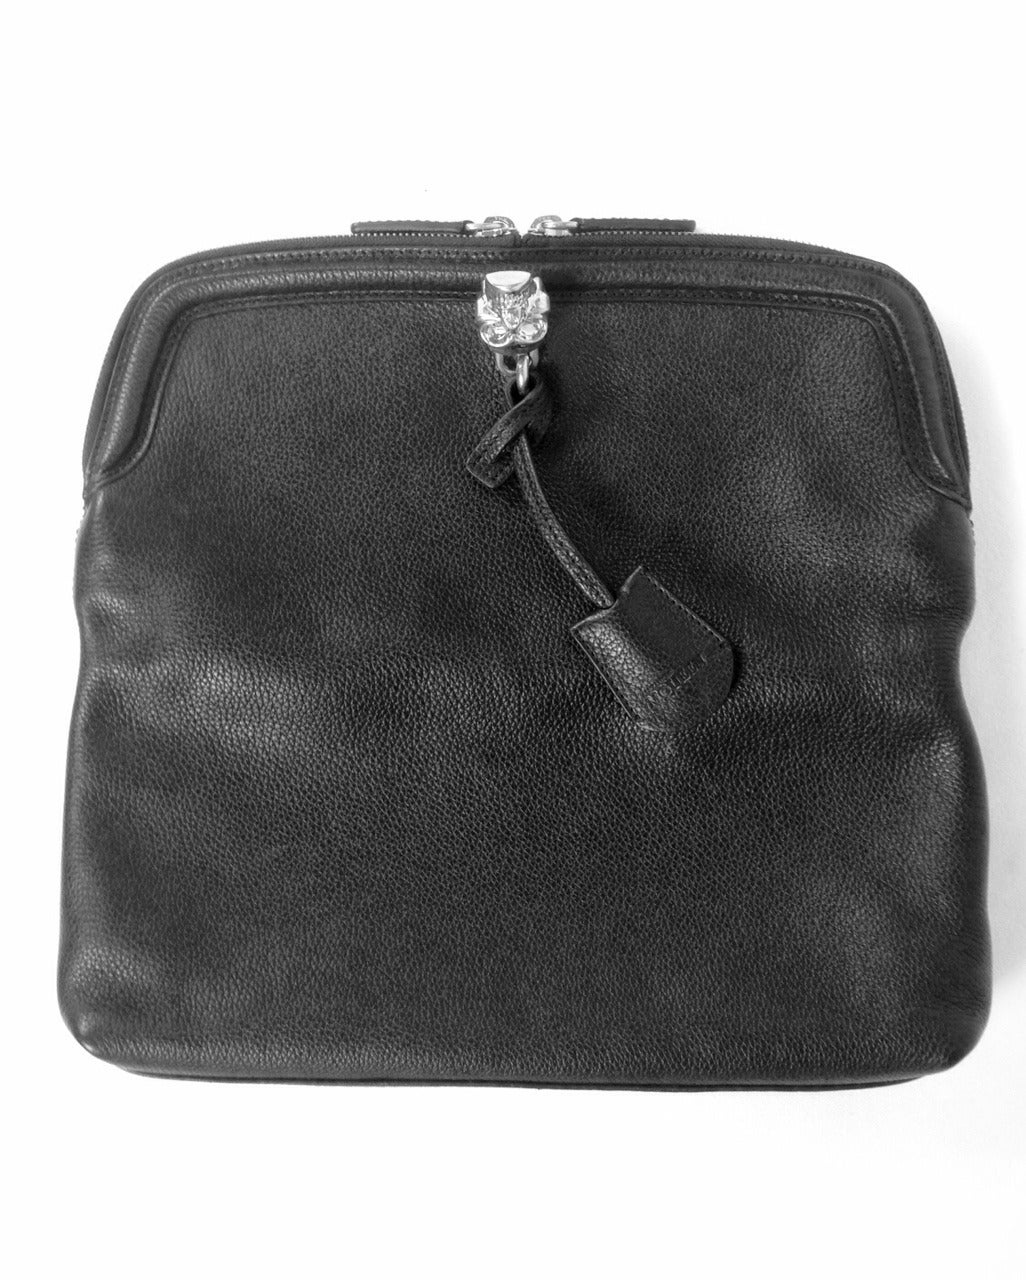 Alexander McQueen envelope clutch bag is a must for all collectors of this legendary designer.  Only the most luxurious butter-soft, textured leather would suffice!  Features contrast edging, piped trim and silver tone hardware.  The piece de